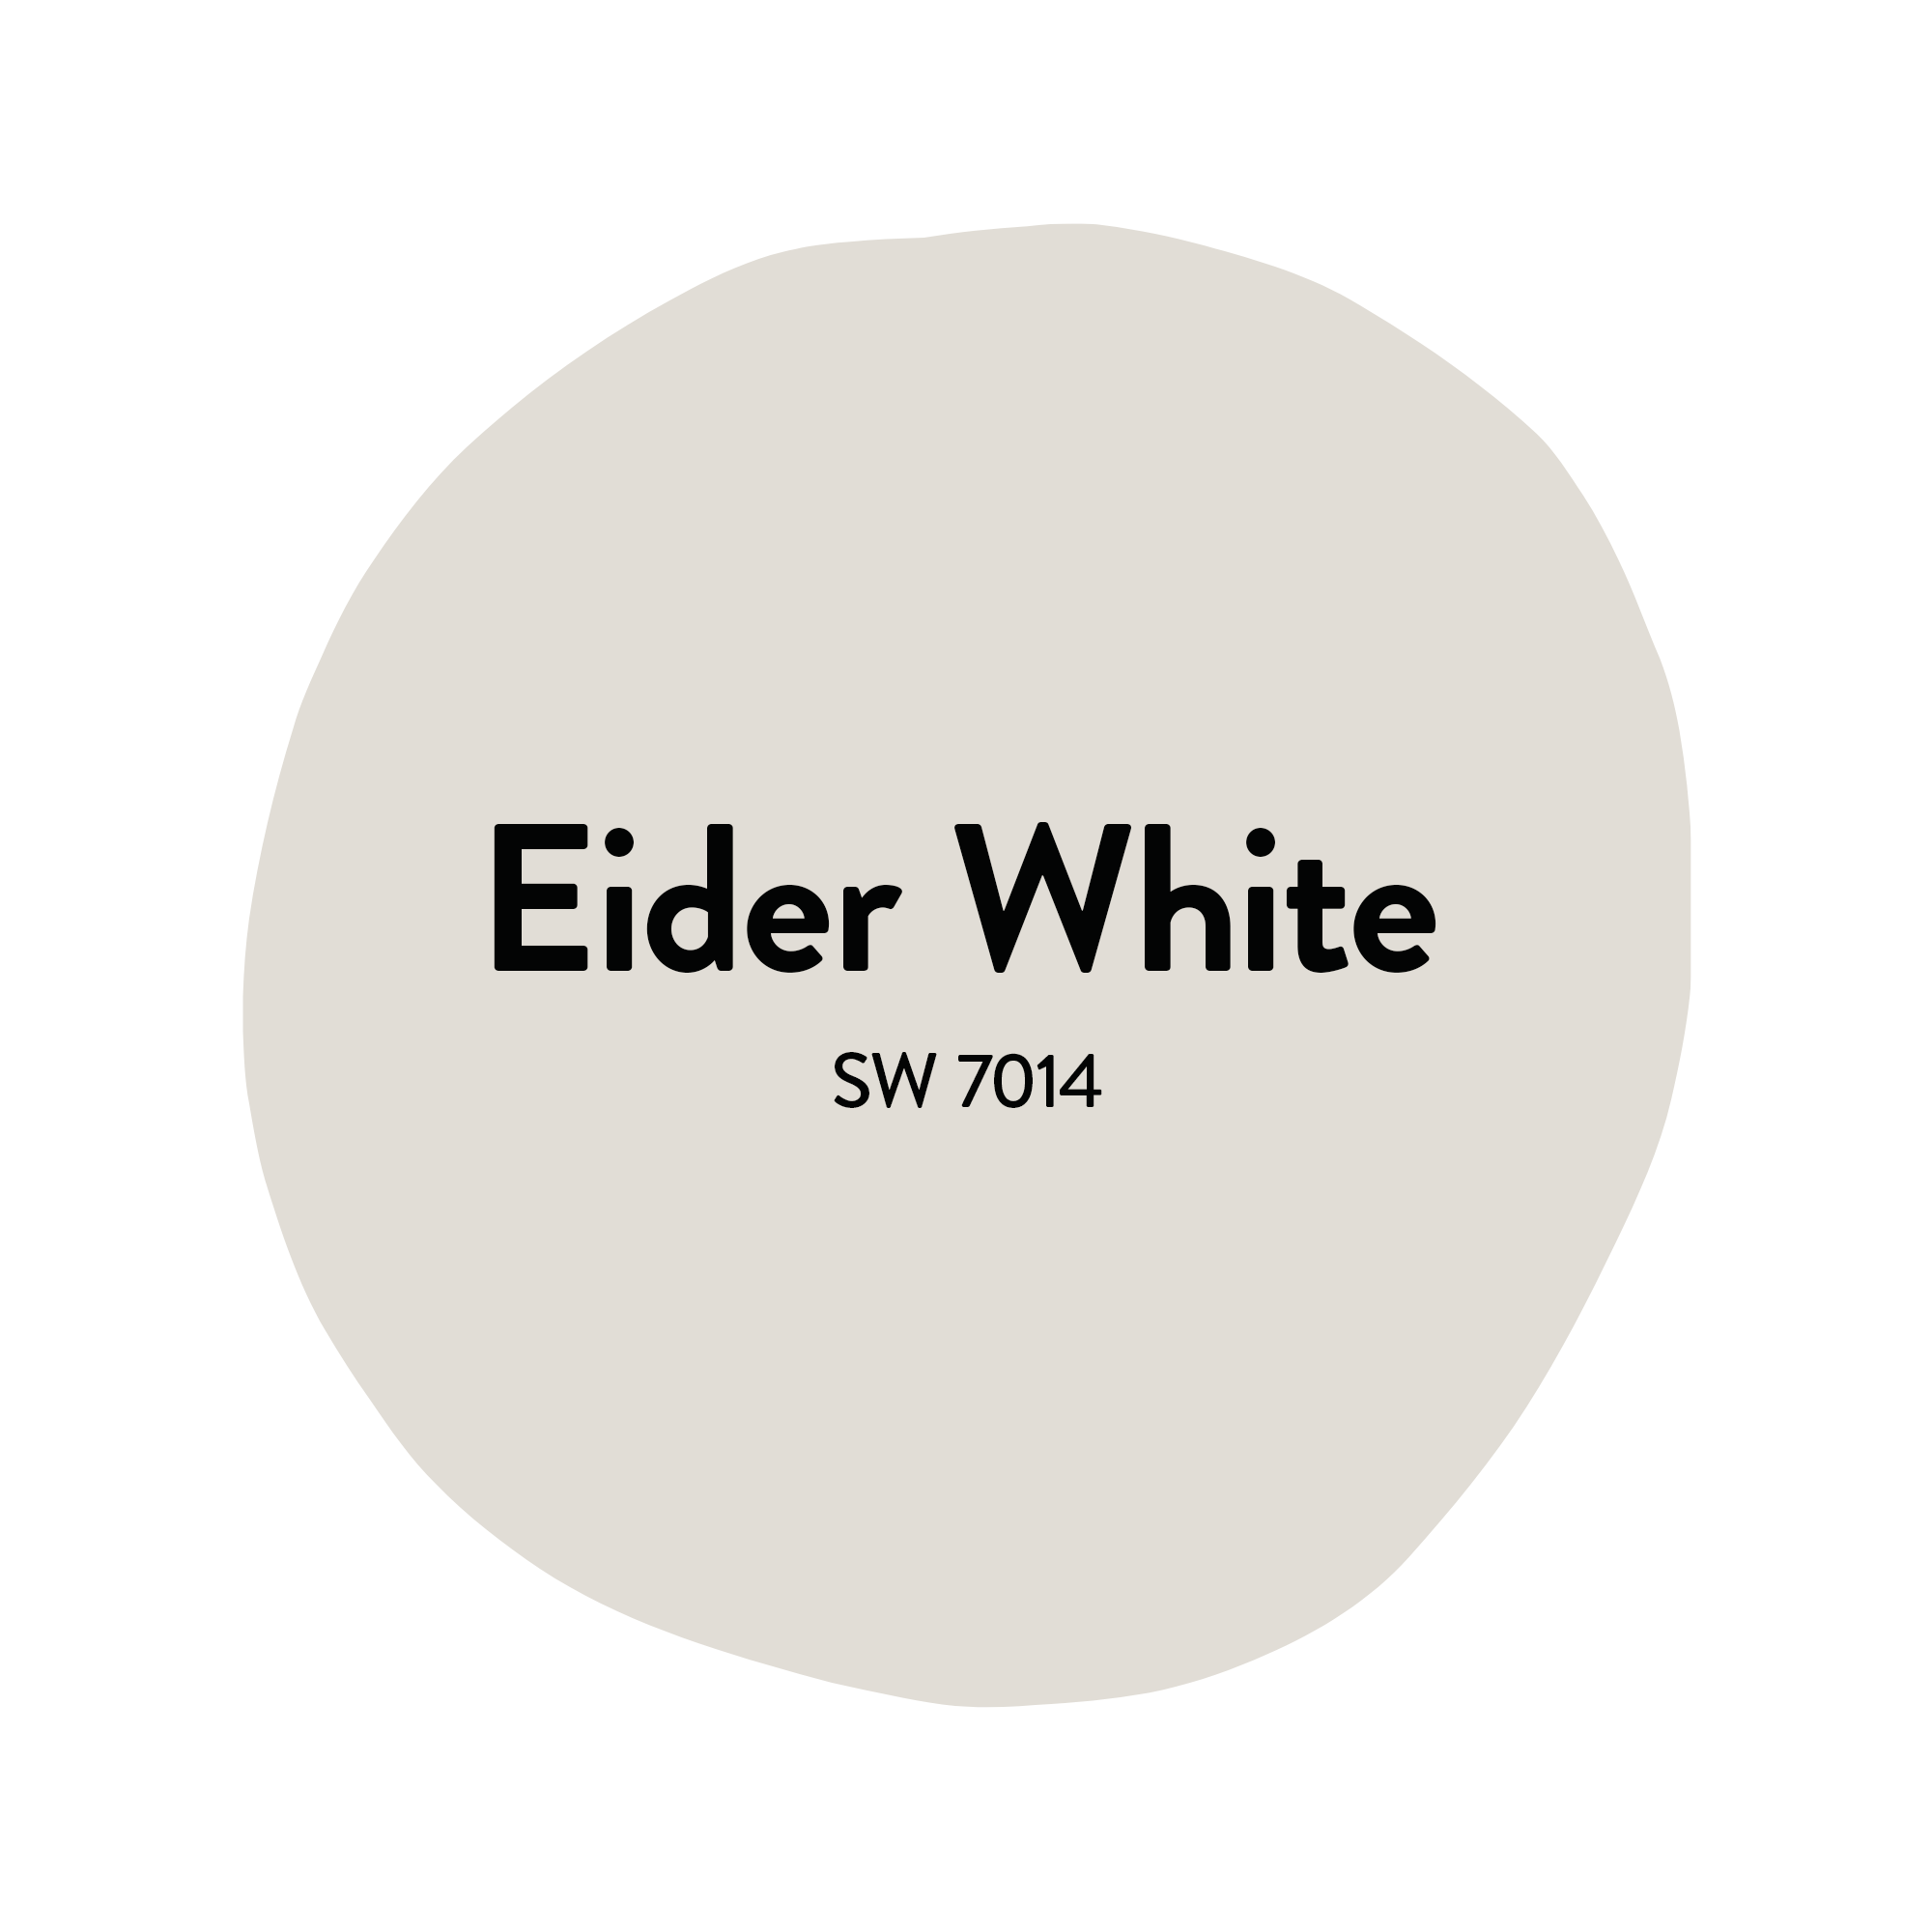 Sherwin Williams' Eider White - SW 7014 recommended by Sonja Pound